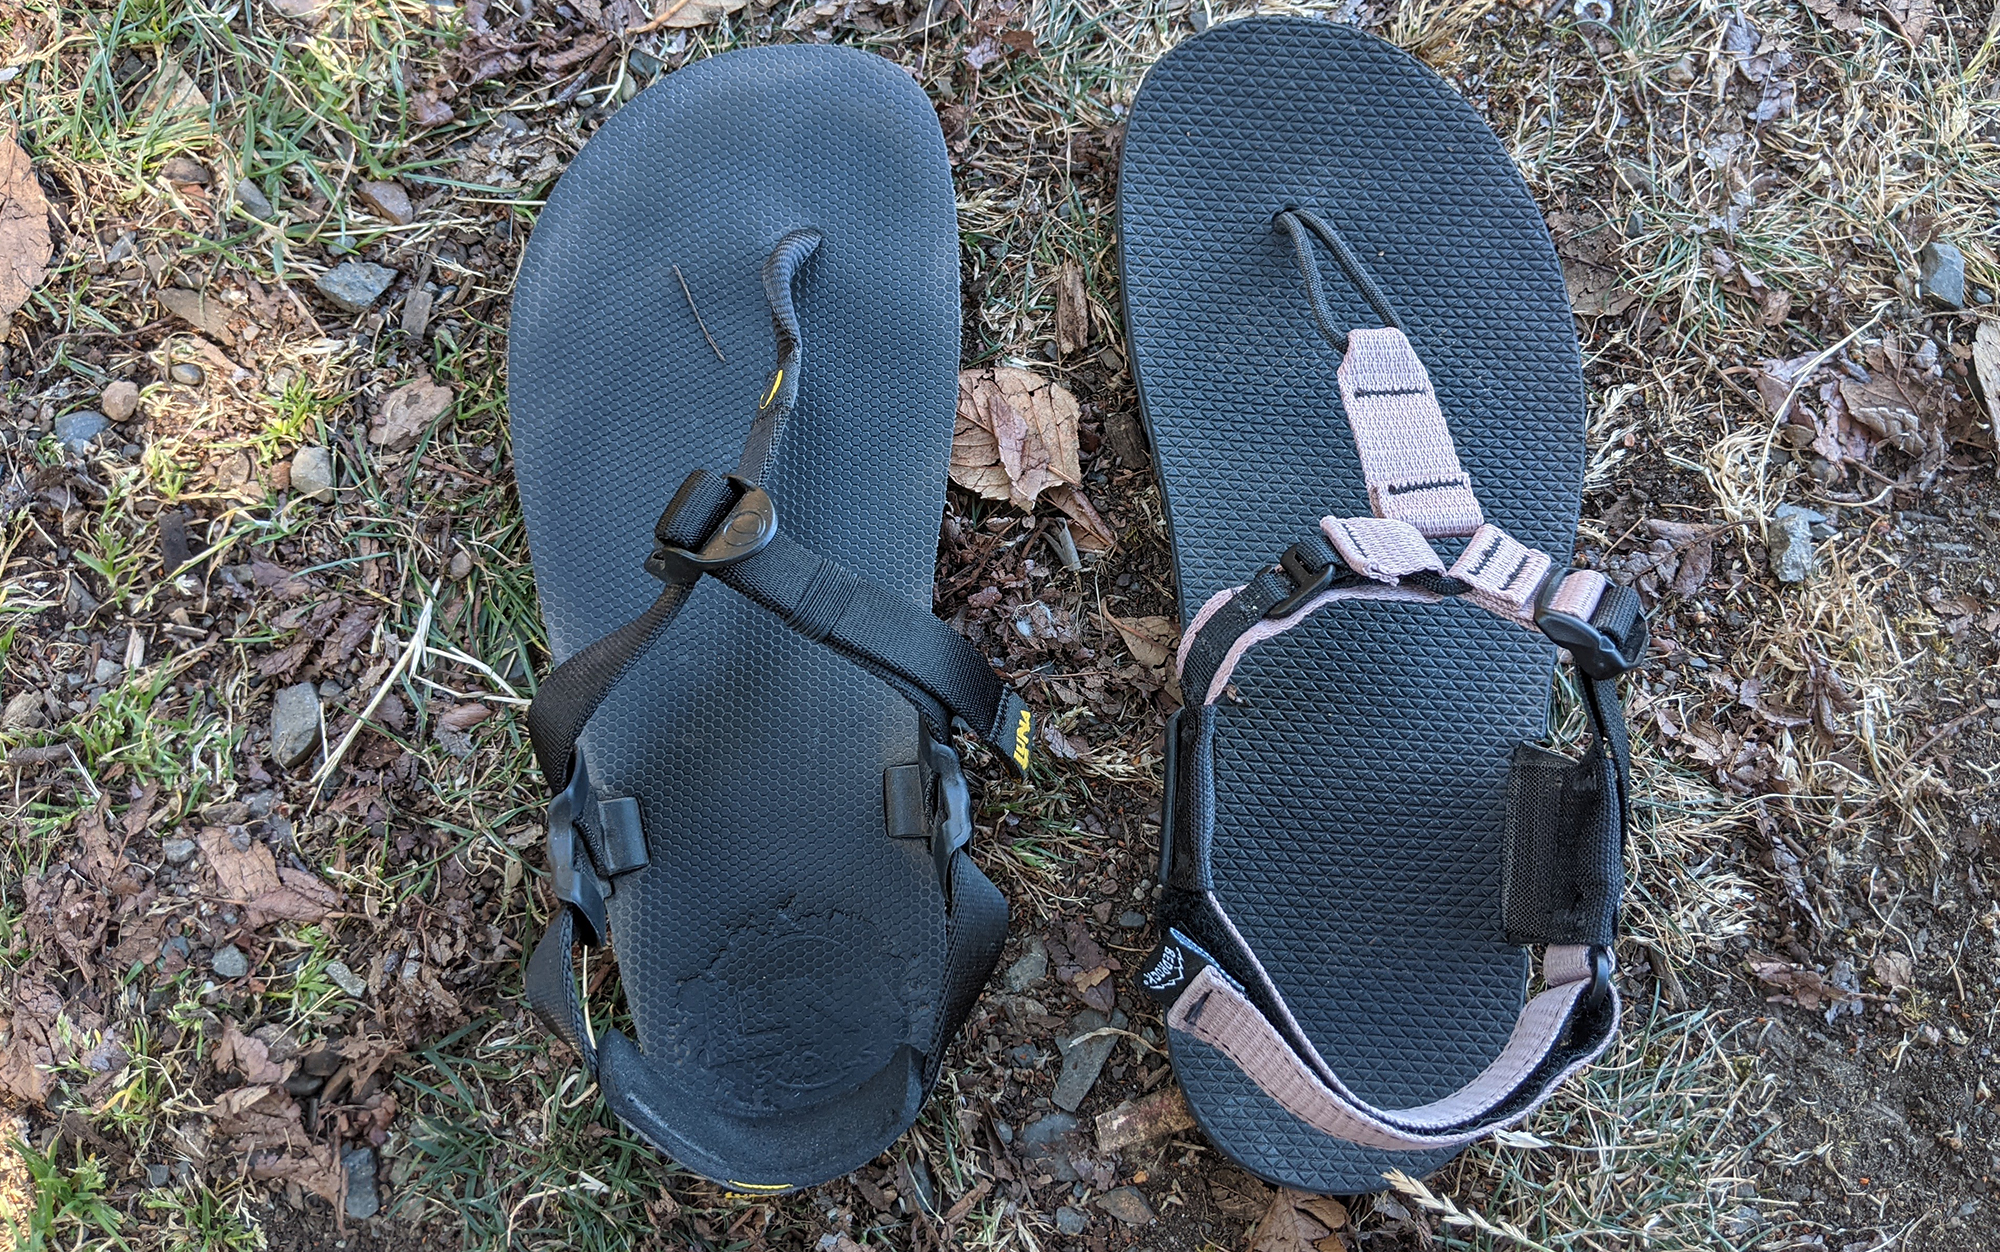 You can’t go wrong when choosing between the Bedrock Cairn Adventure Sandals (right) and Luna Middle Bear Sandals (left).